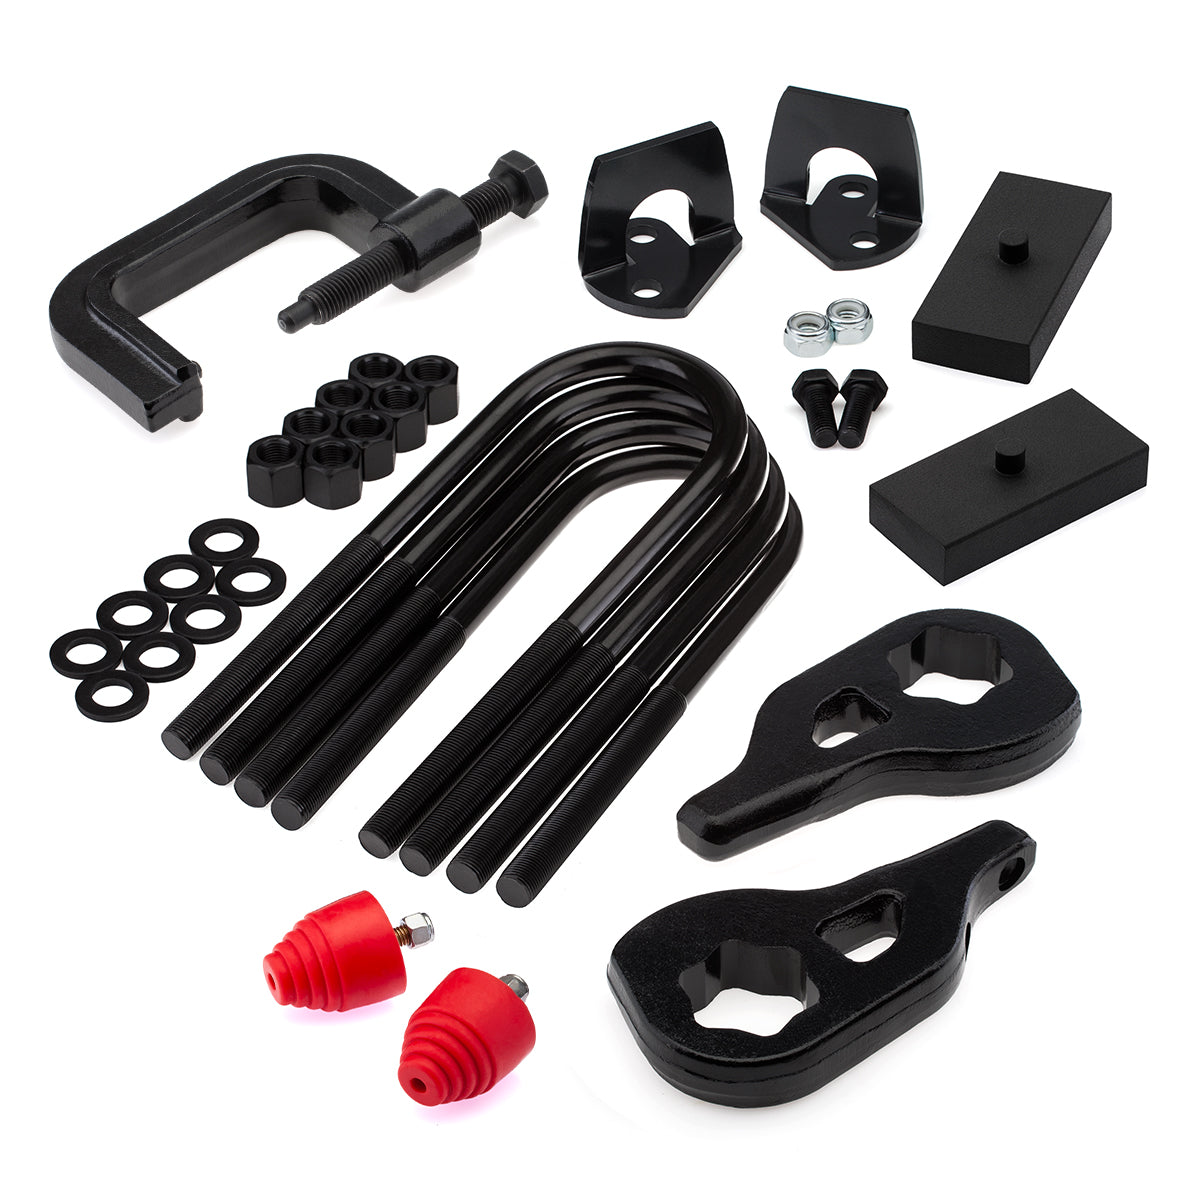 2002-2005 Dodge Ram 1500 Full Lift Kit with Shock Extensions Bump Stops and Torsion Key Unloading/Removal Tool